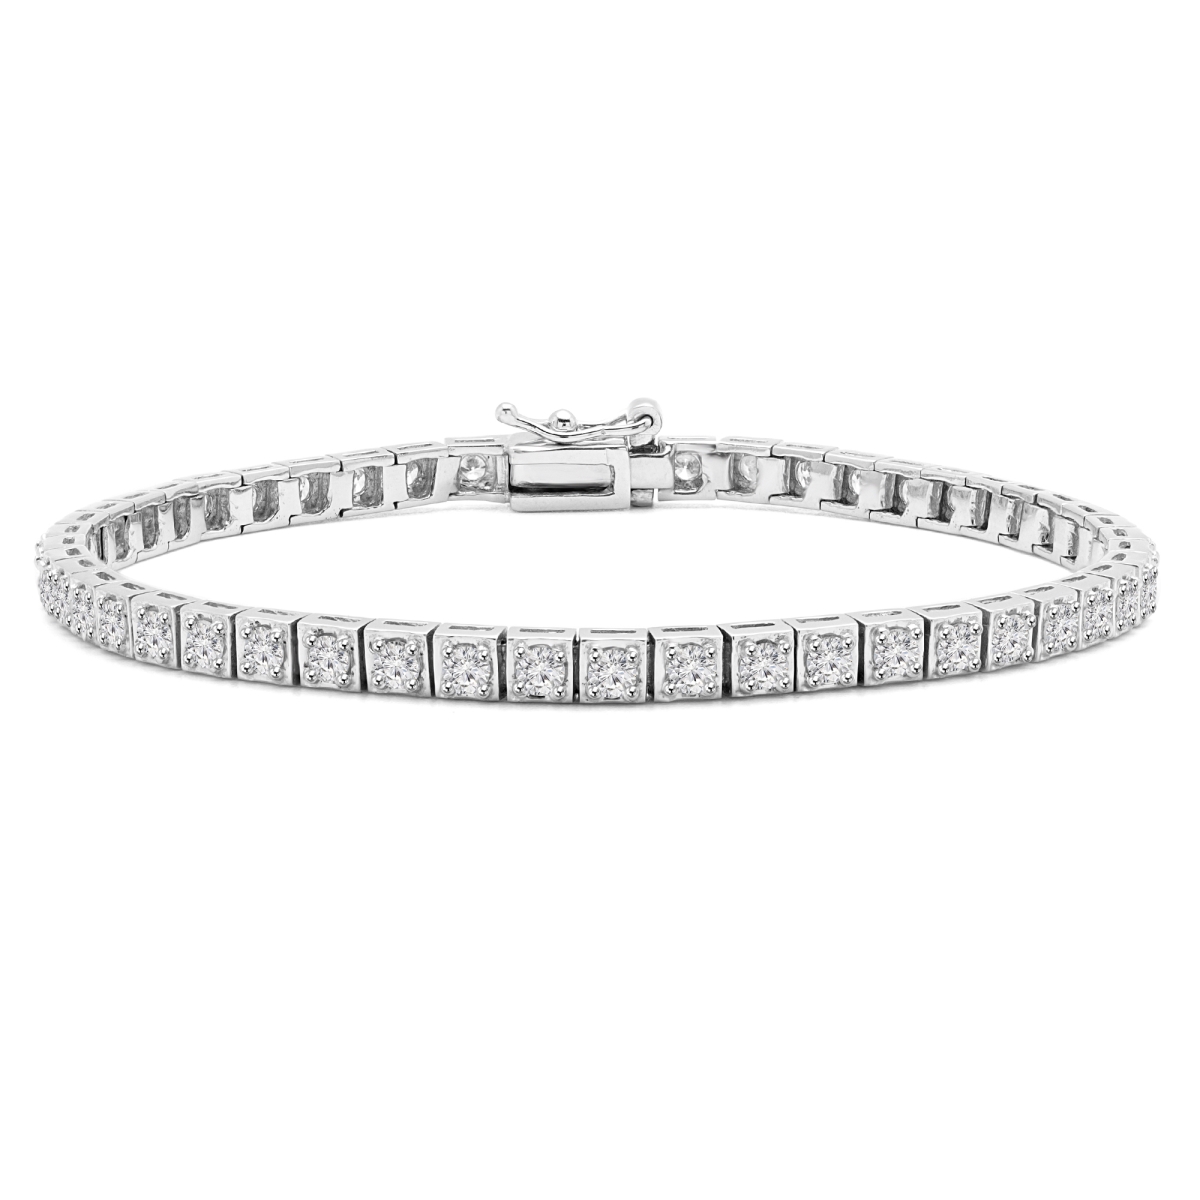 Picture of Majesty Diamonds MD240283 1.6 CTW Round Lab Created Diamond Tennis Bracelet in 14K White Gold